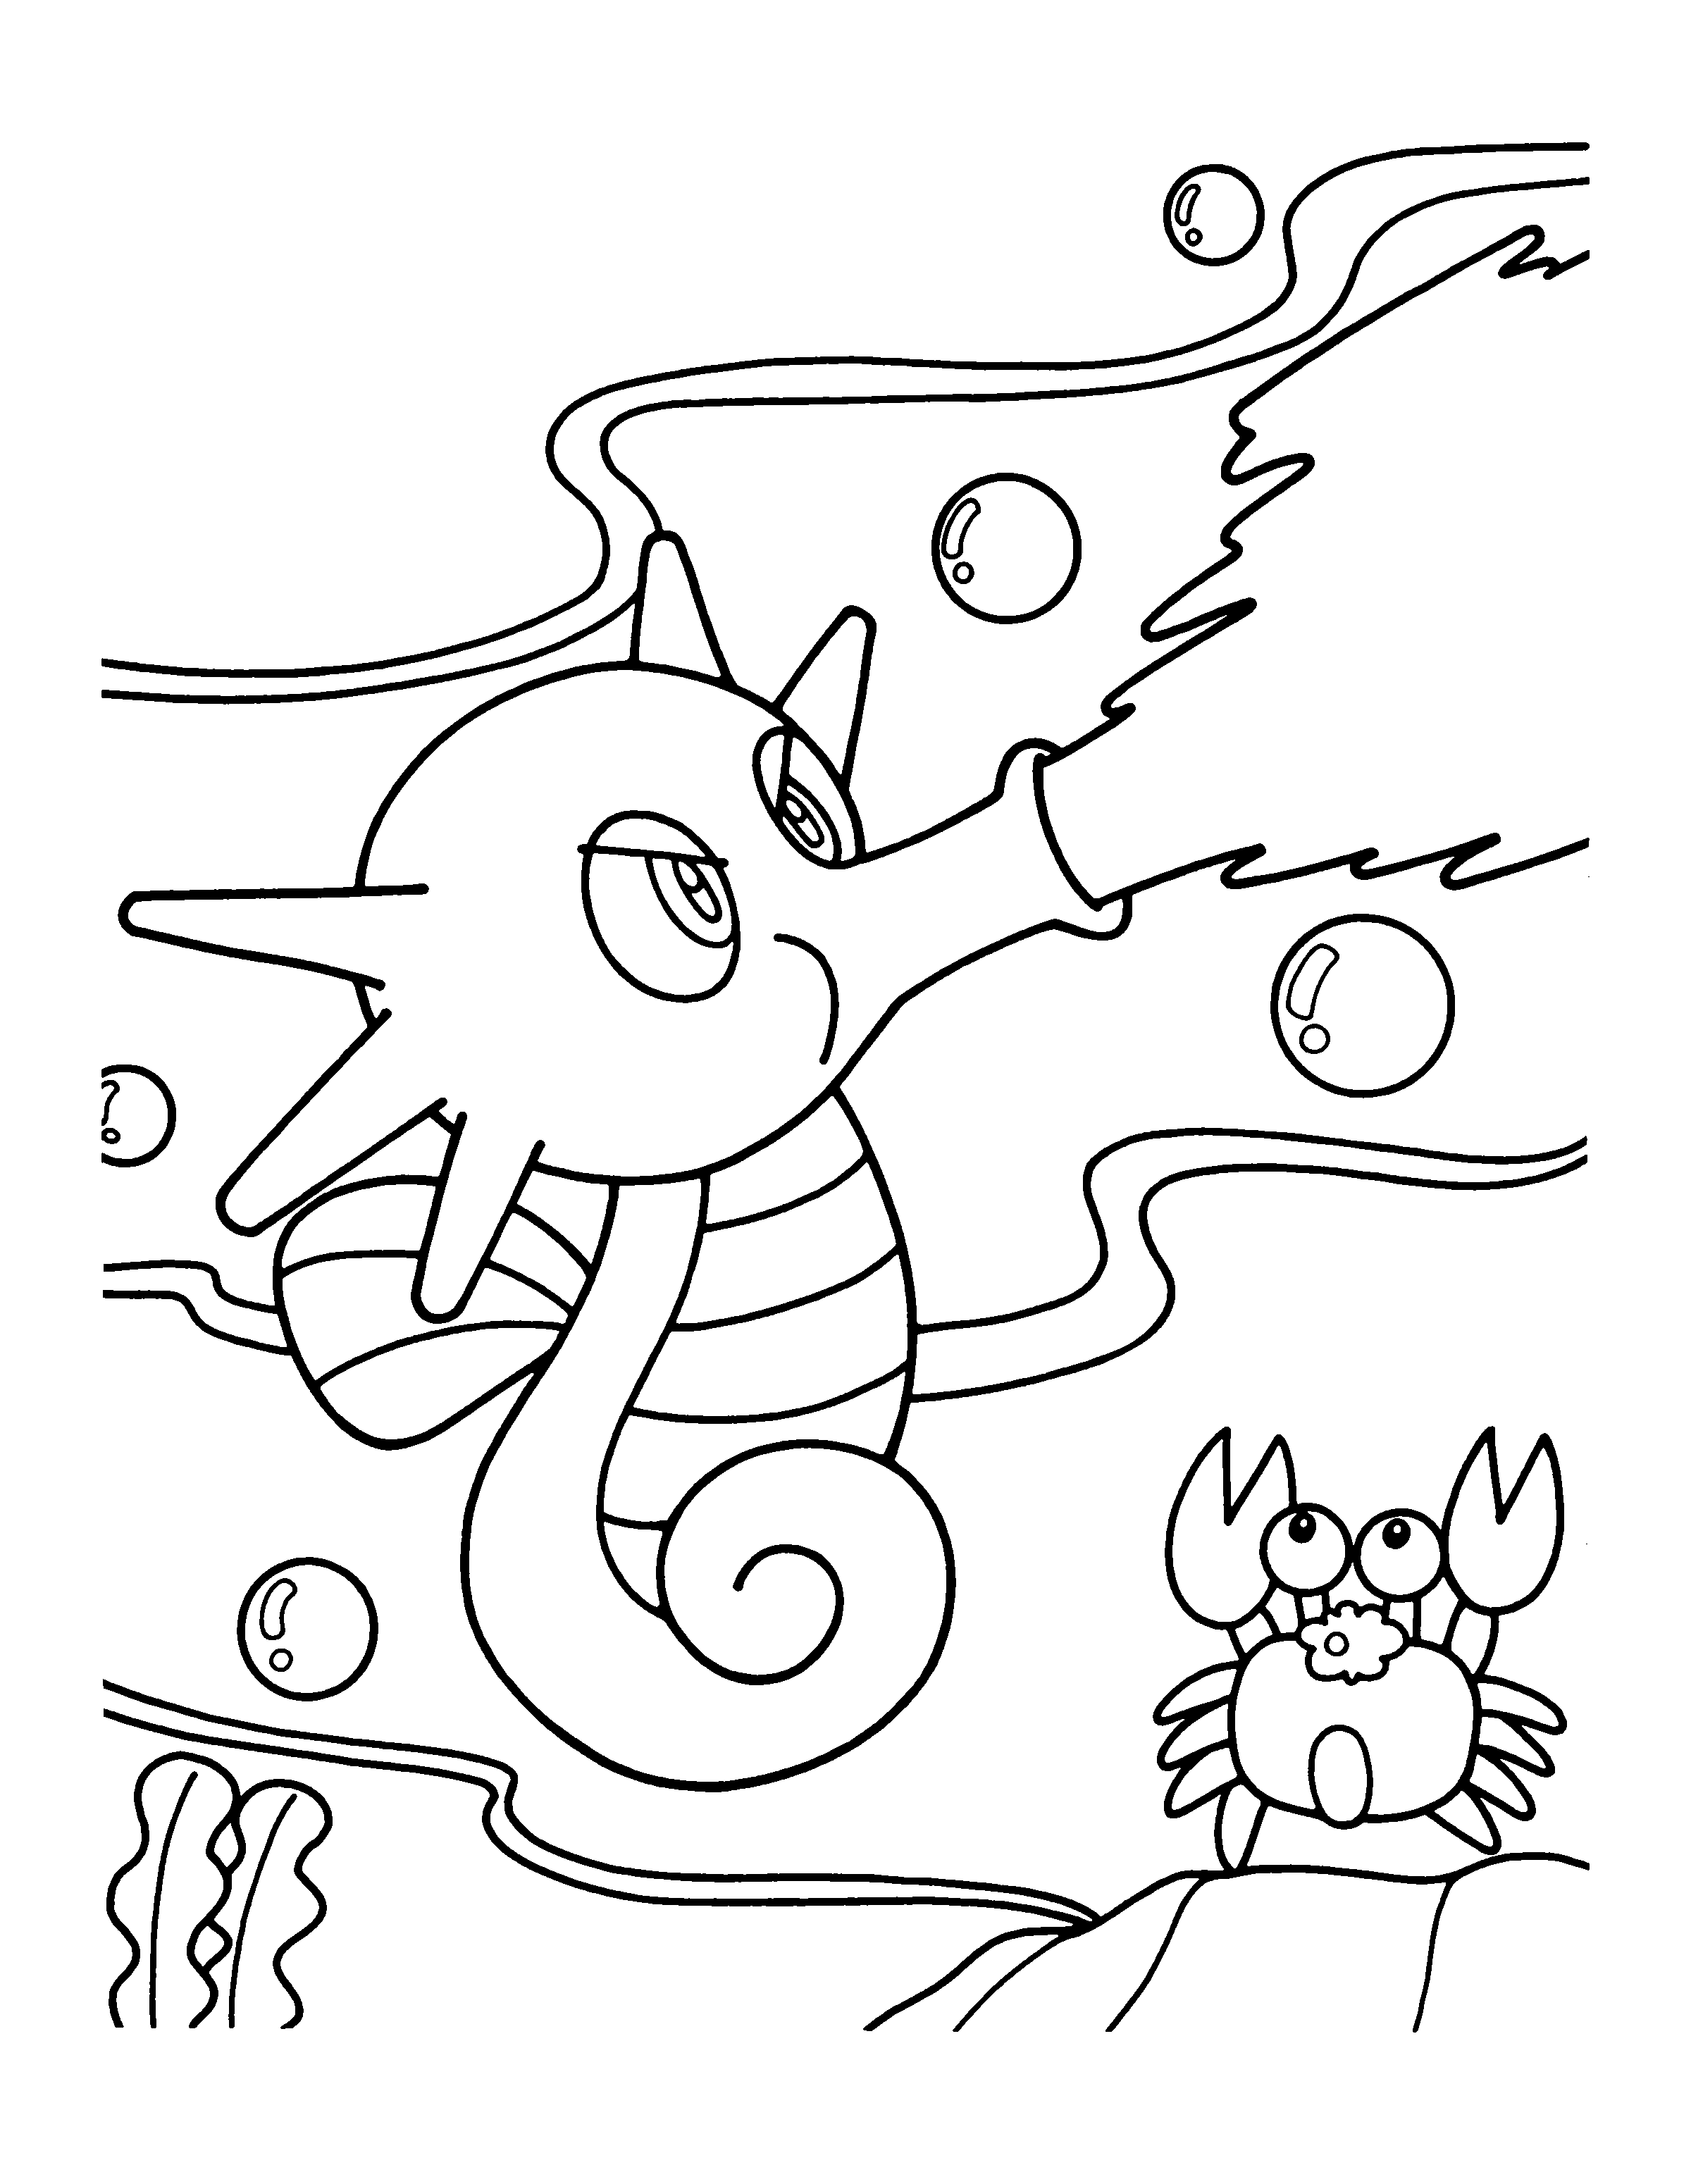 animated-coloring-pages-pokemon-image-0696